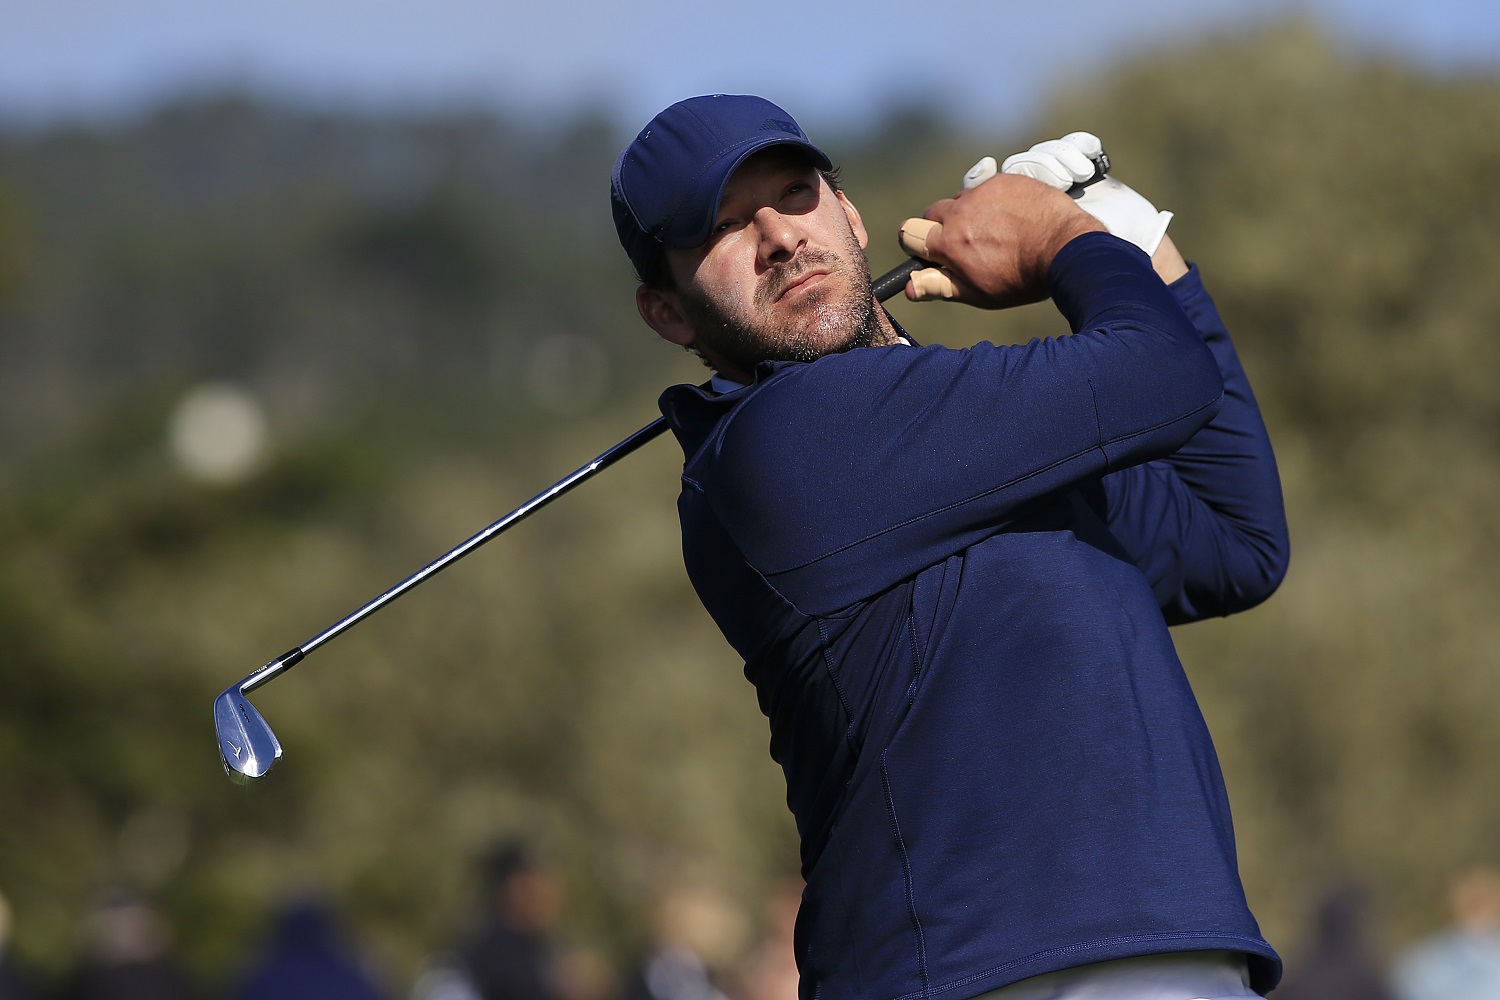 Tony Romo is an accomplished golfer, but he has once again fallen short in an attempt to qualify for the U.S. Open. | Chris Trotman/Getty Images